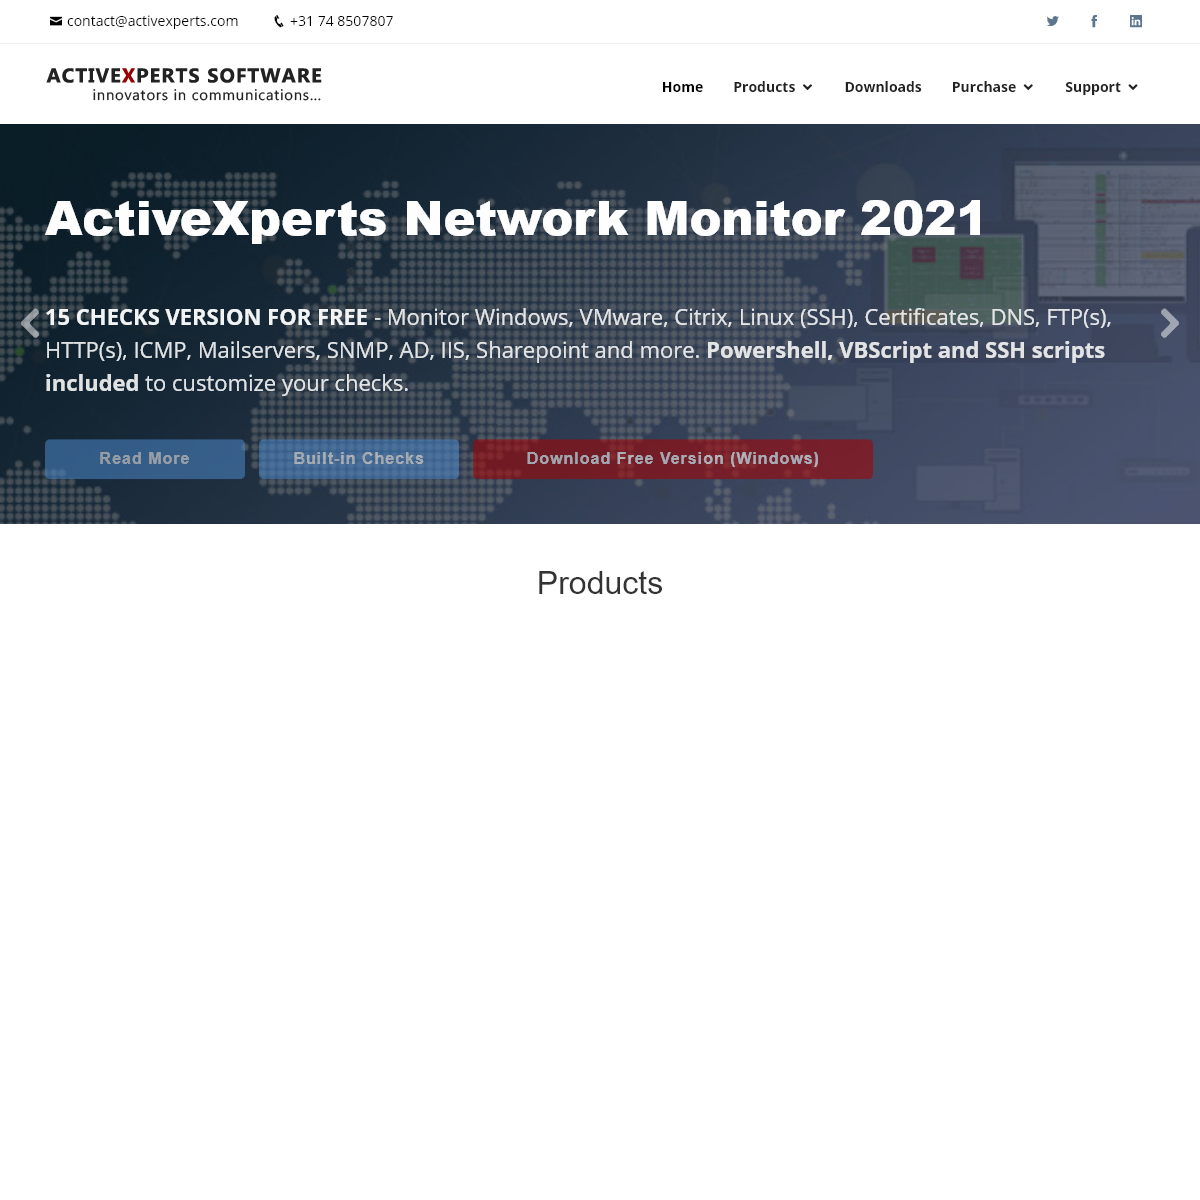 A complete backup of activexperts.com